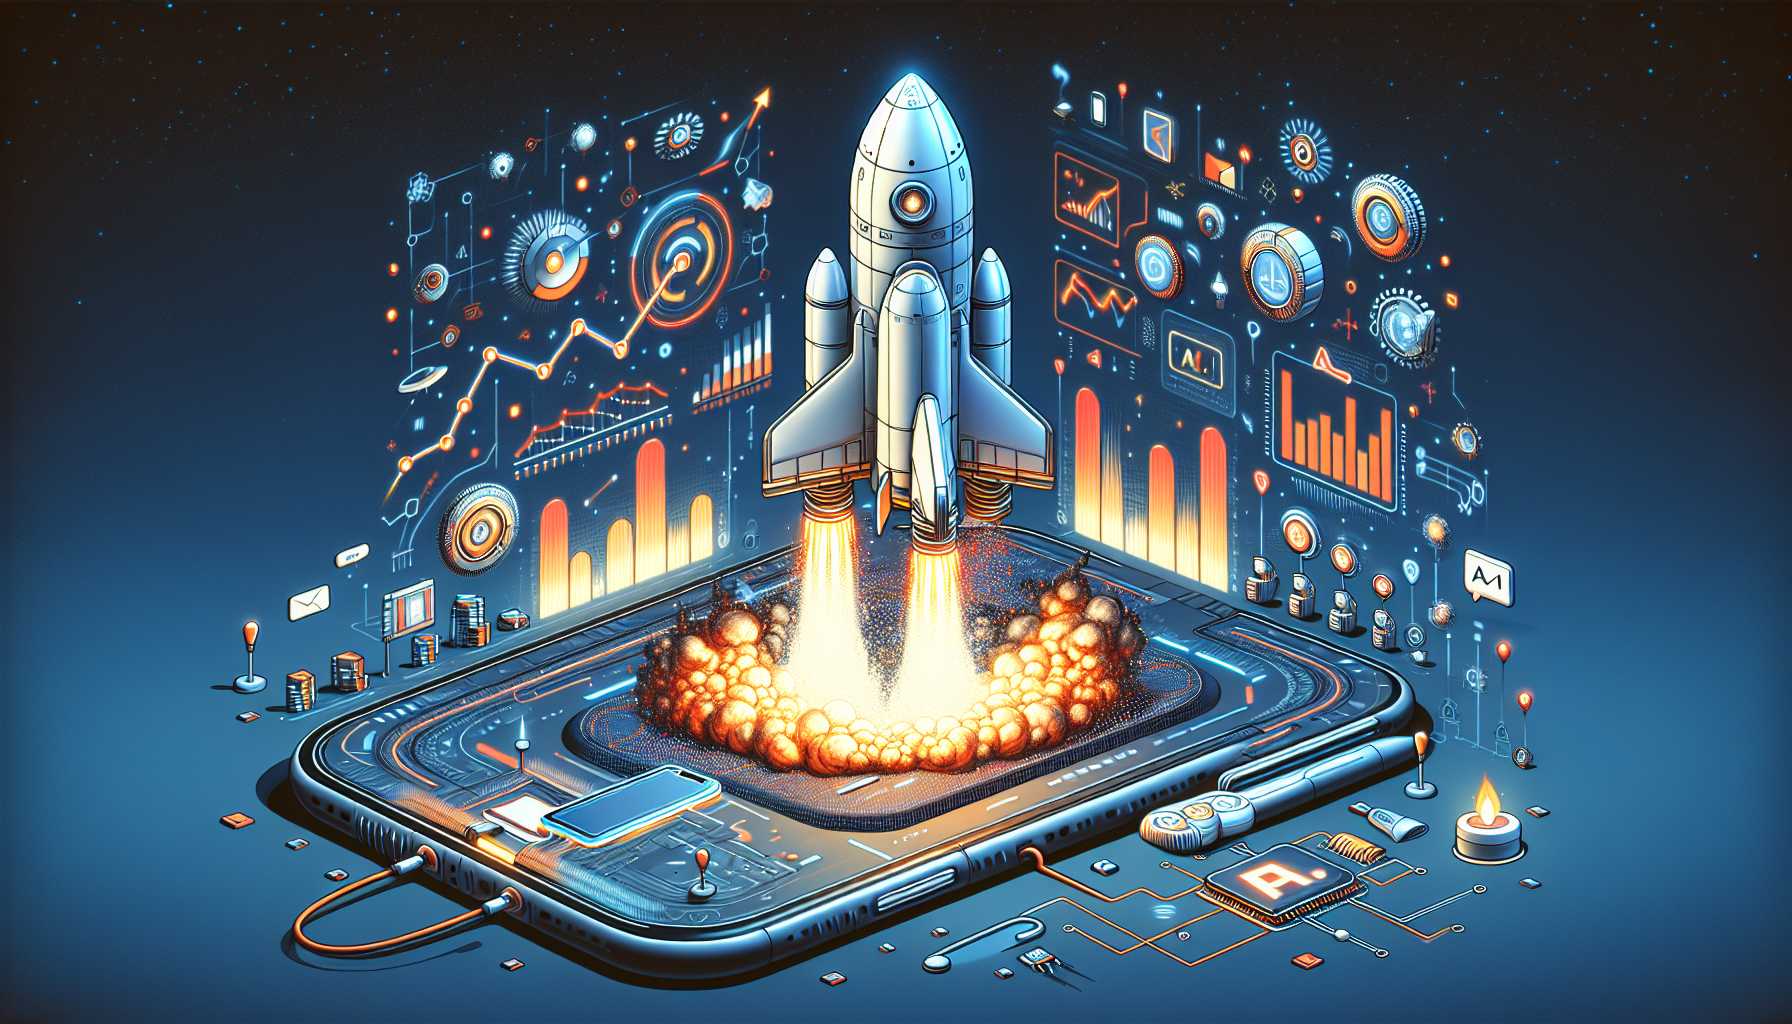 an animated rocket launch symbolizing Ramp's explosive growth thanks to AI investment